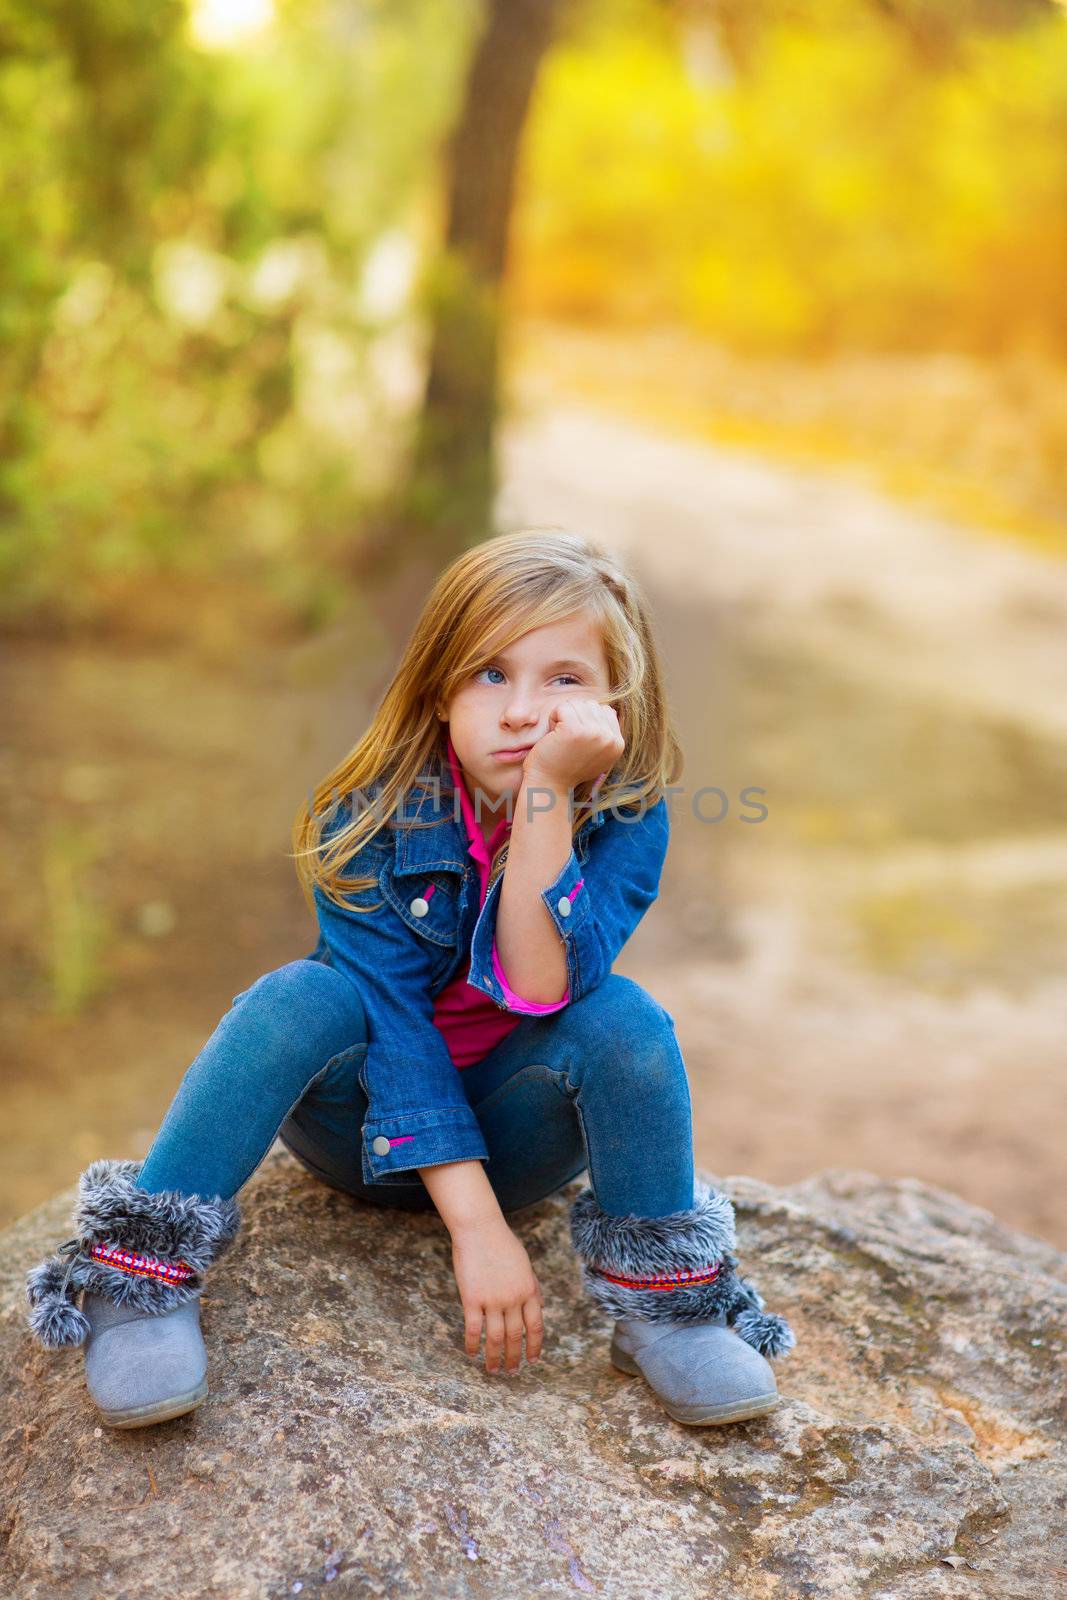 blond kid girl pensive bored expression in the forest outdoor sitting on a rock